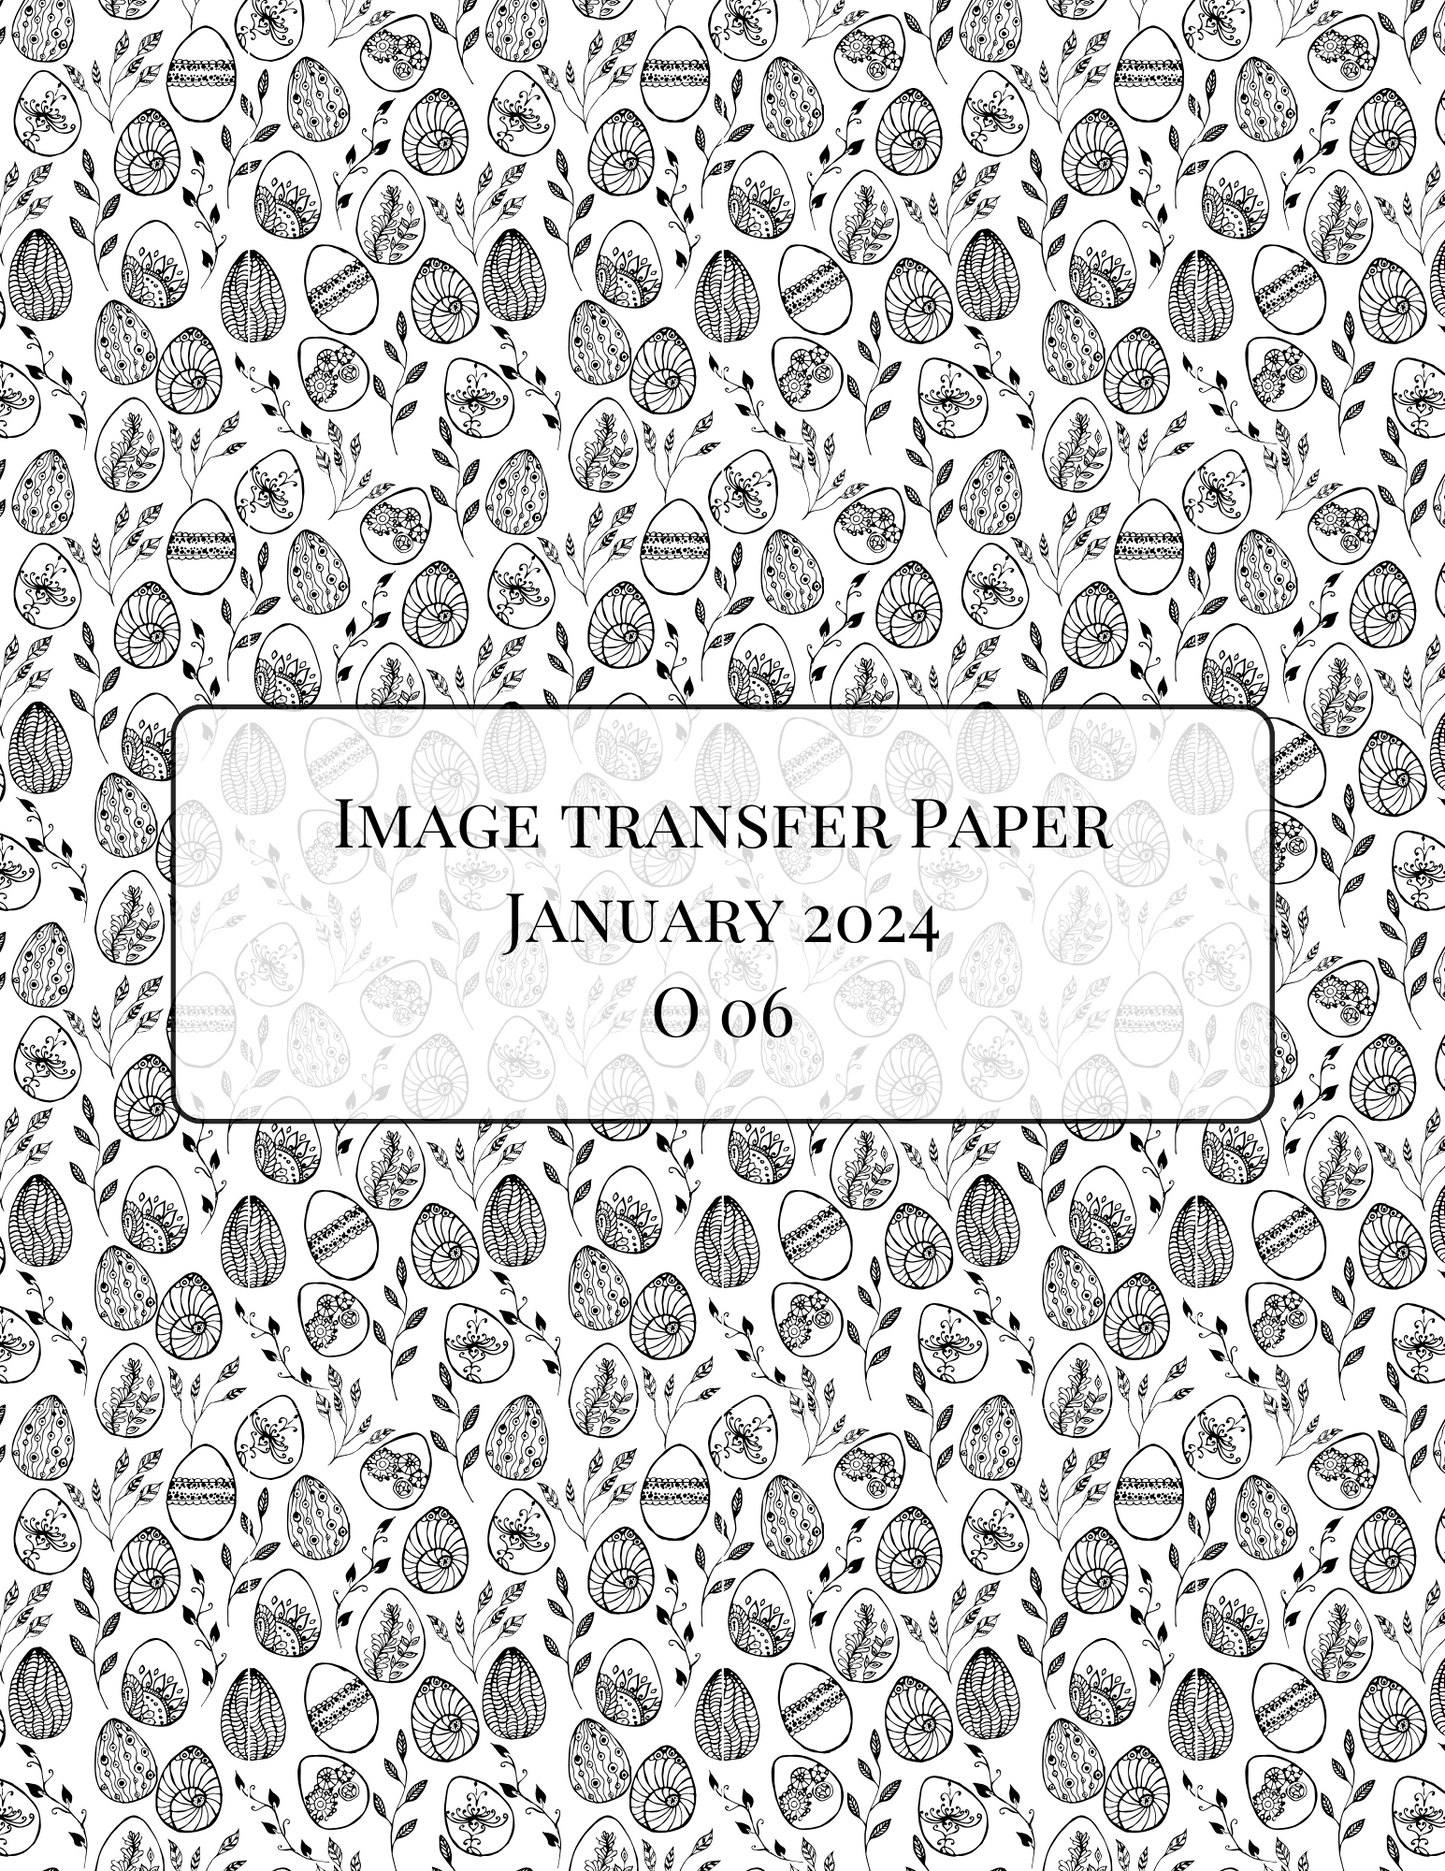 O06 Transfer Paper - January Launch